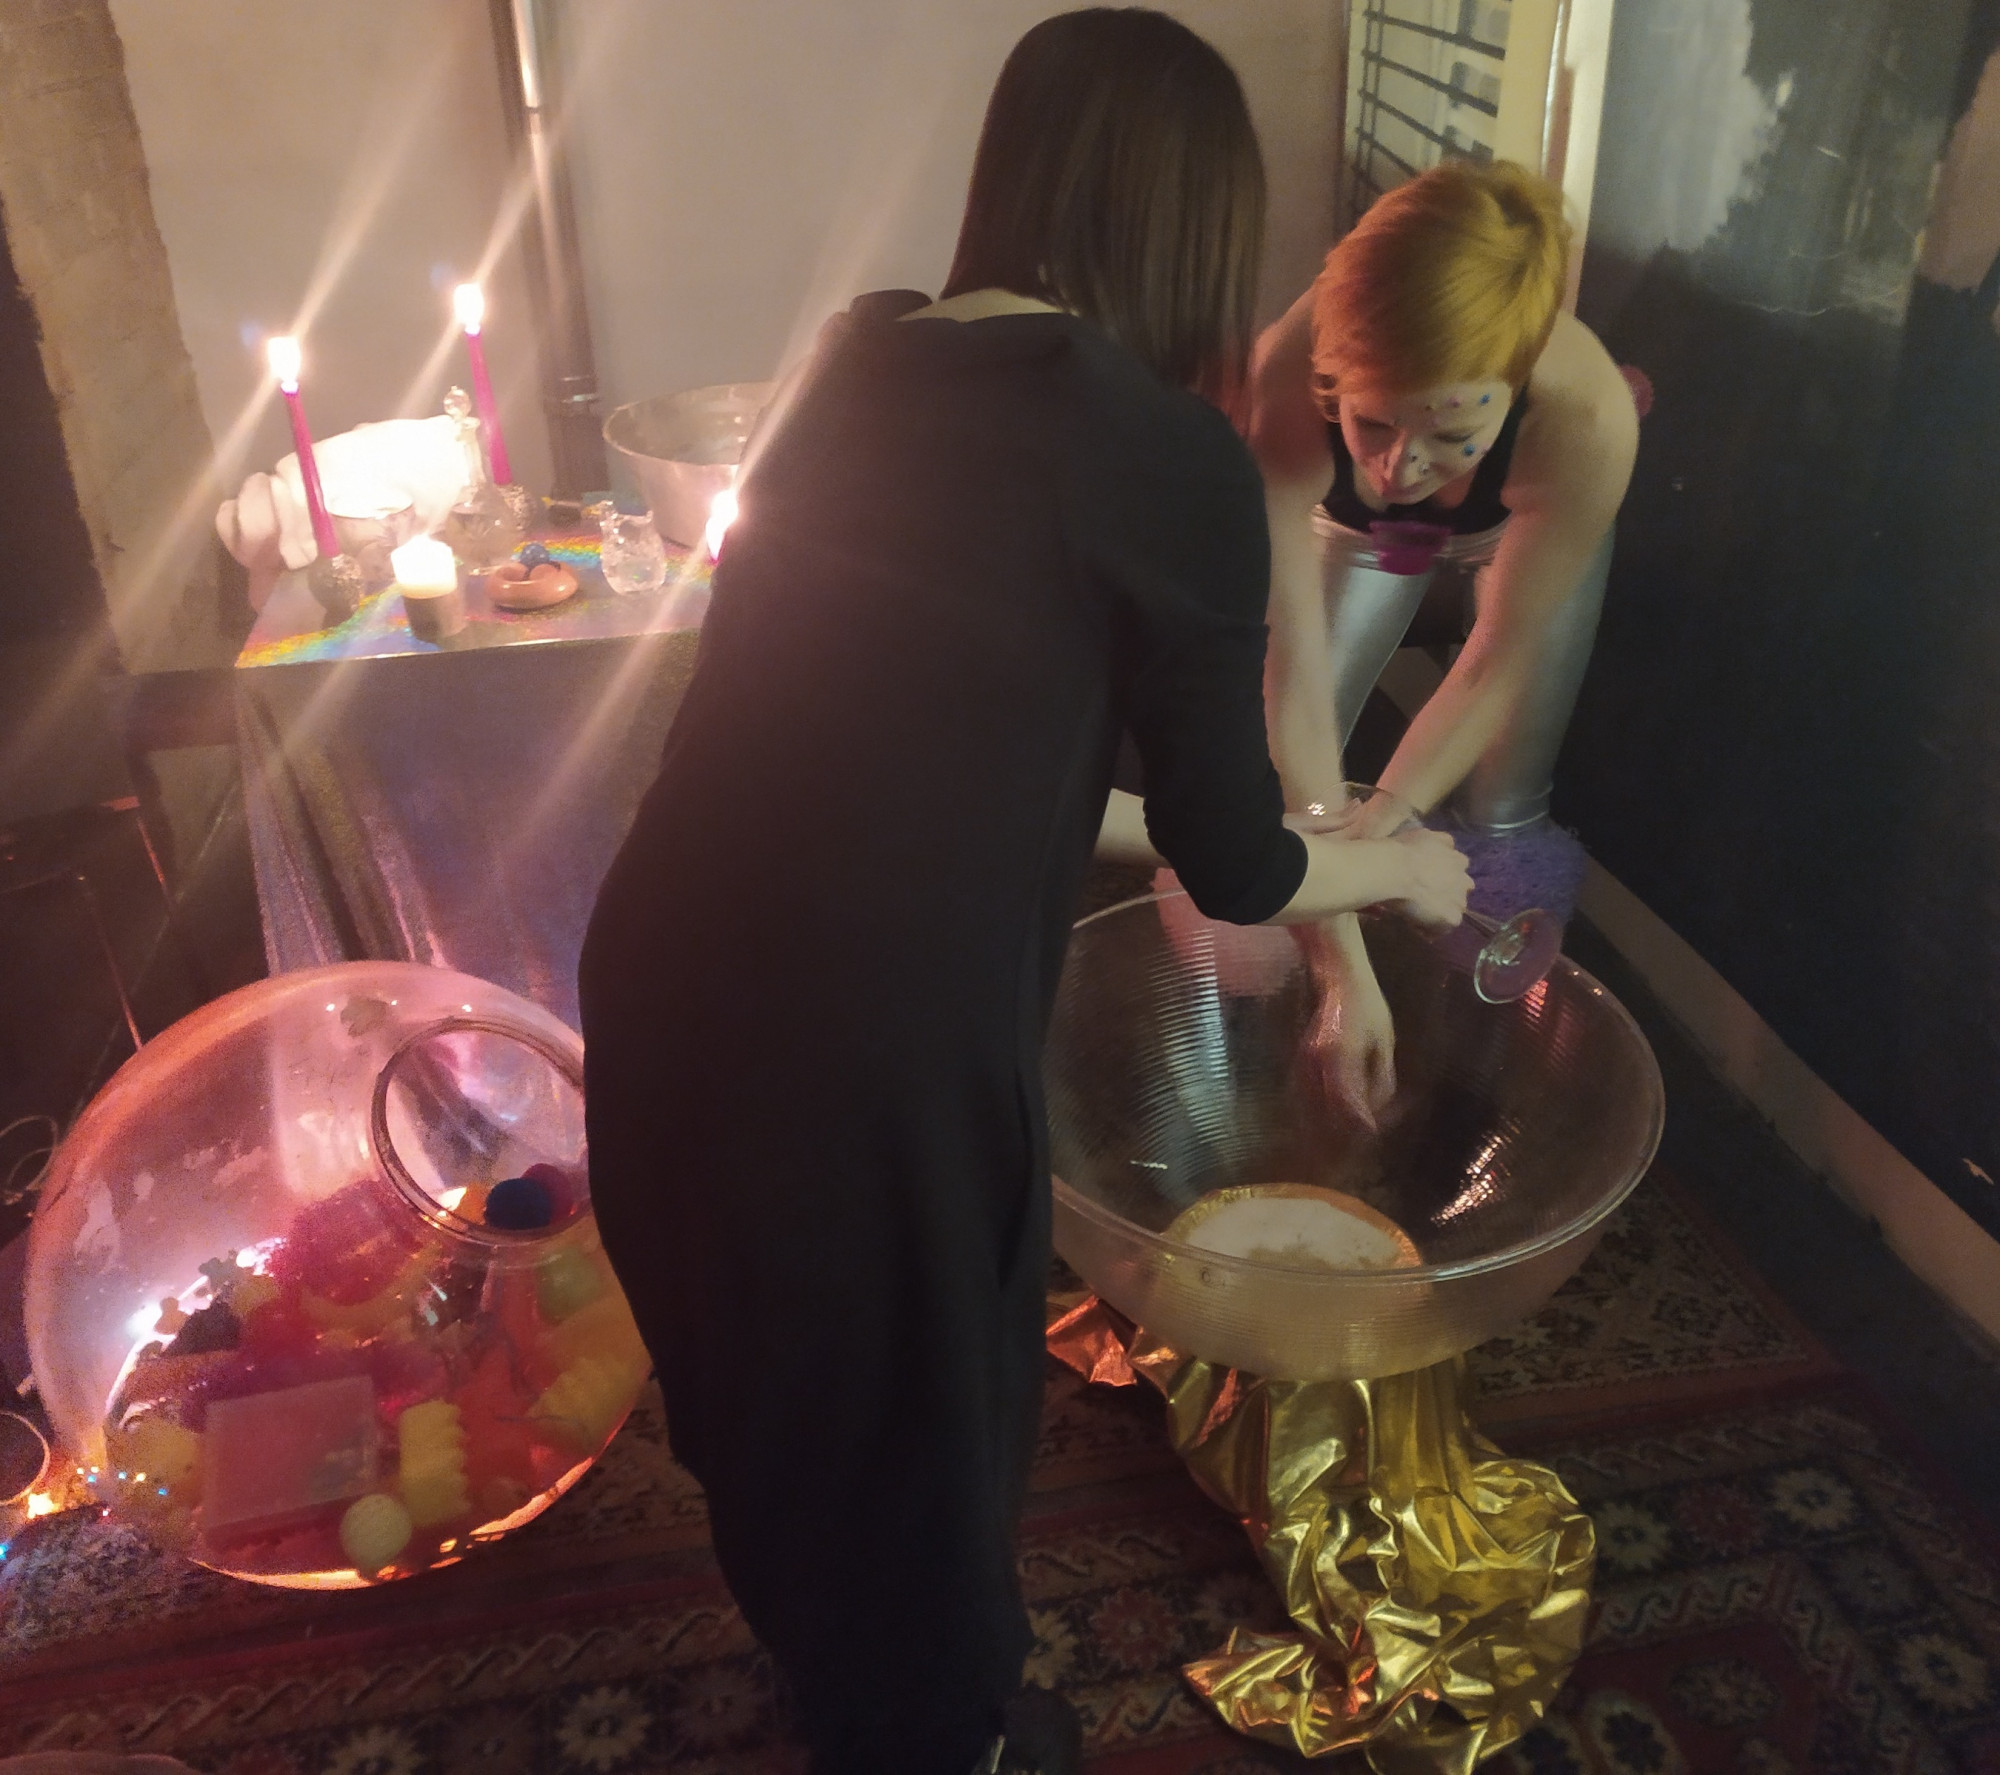 No Entry, 2020. Eternal Spring exhibition, Lyuda Gallery, St Petersburg. Curator: Peter Belyi. This performance takes shape of a ritual that problematises relationships and explores misunderstandings within the art community